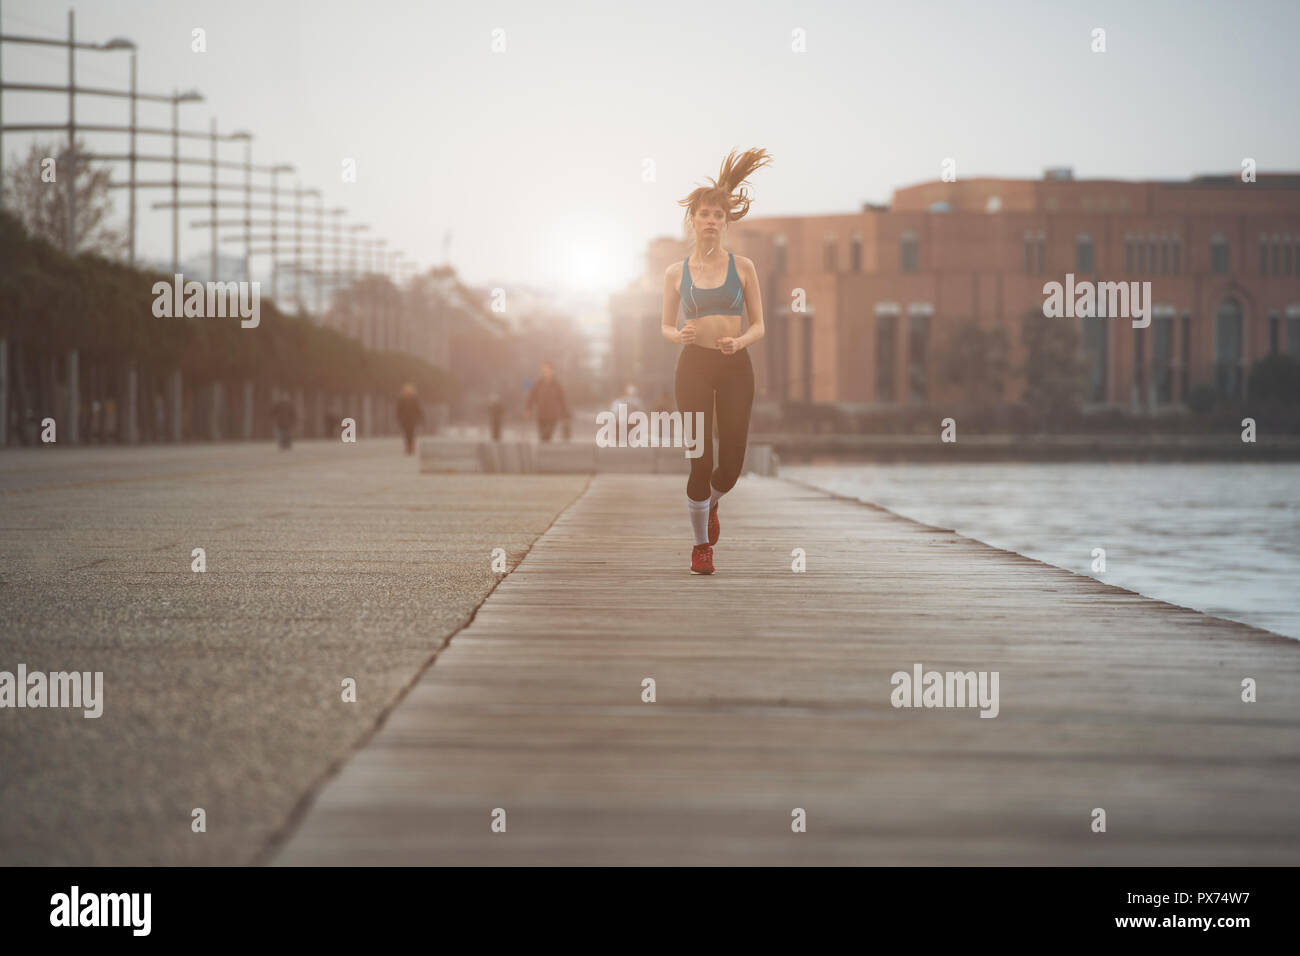 a woman jogging by the seaside in urban city environment Stock Photo